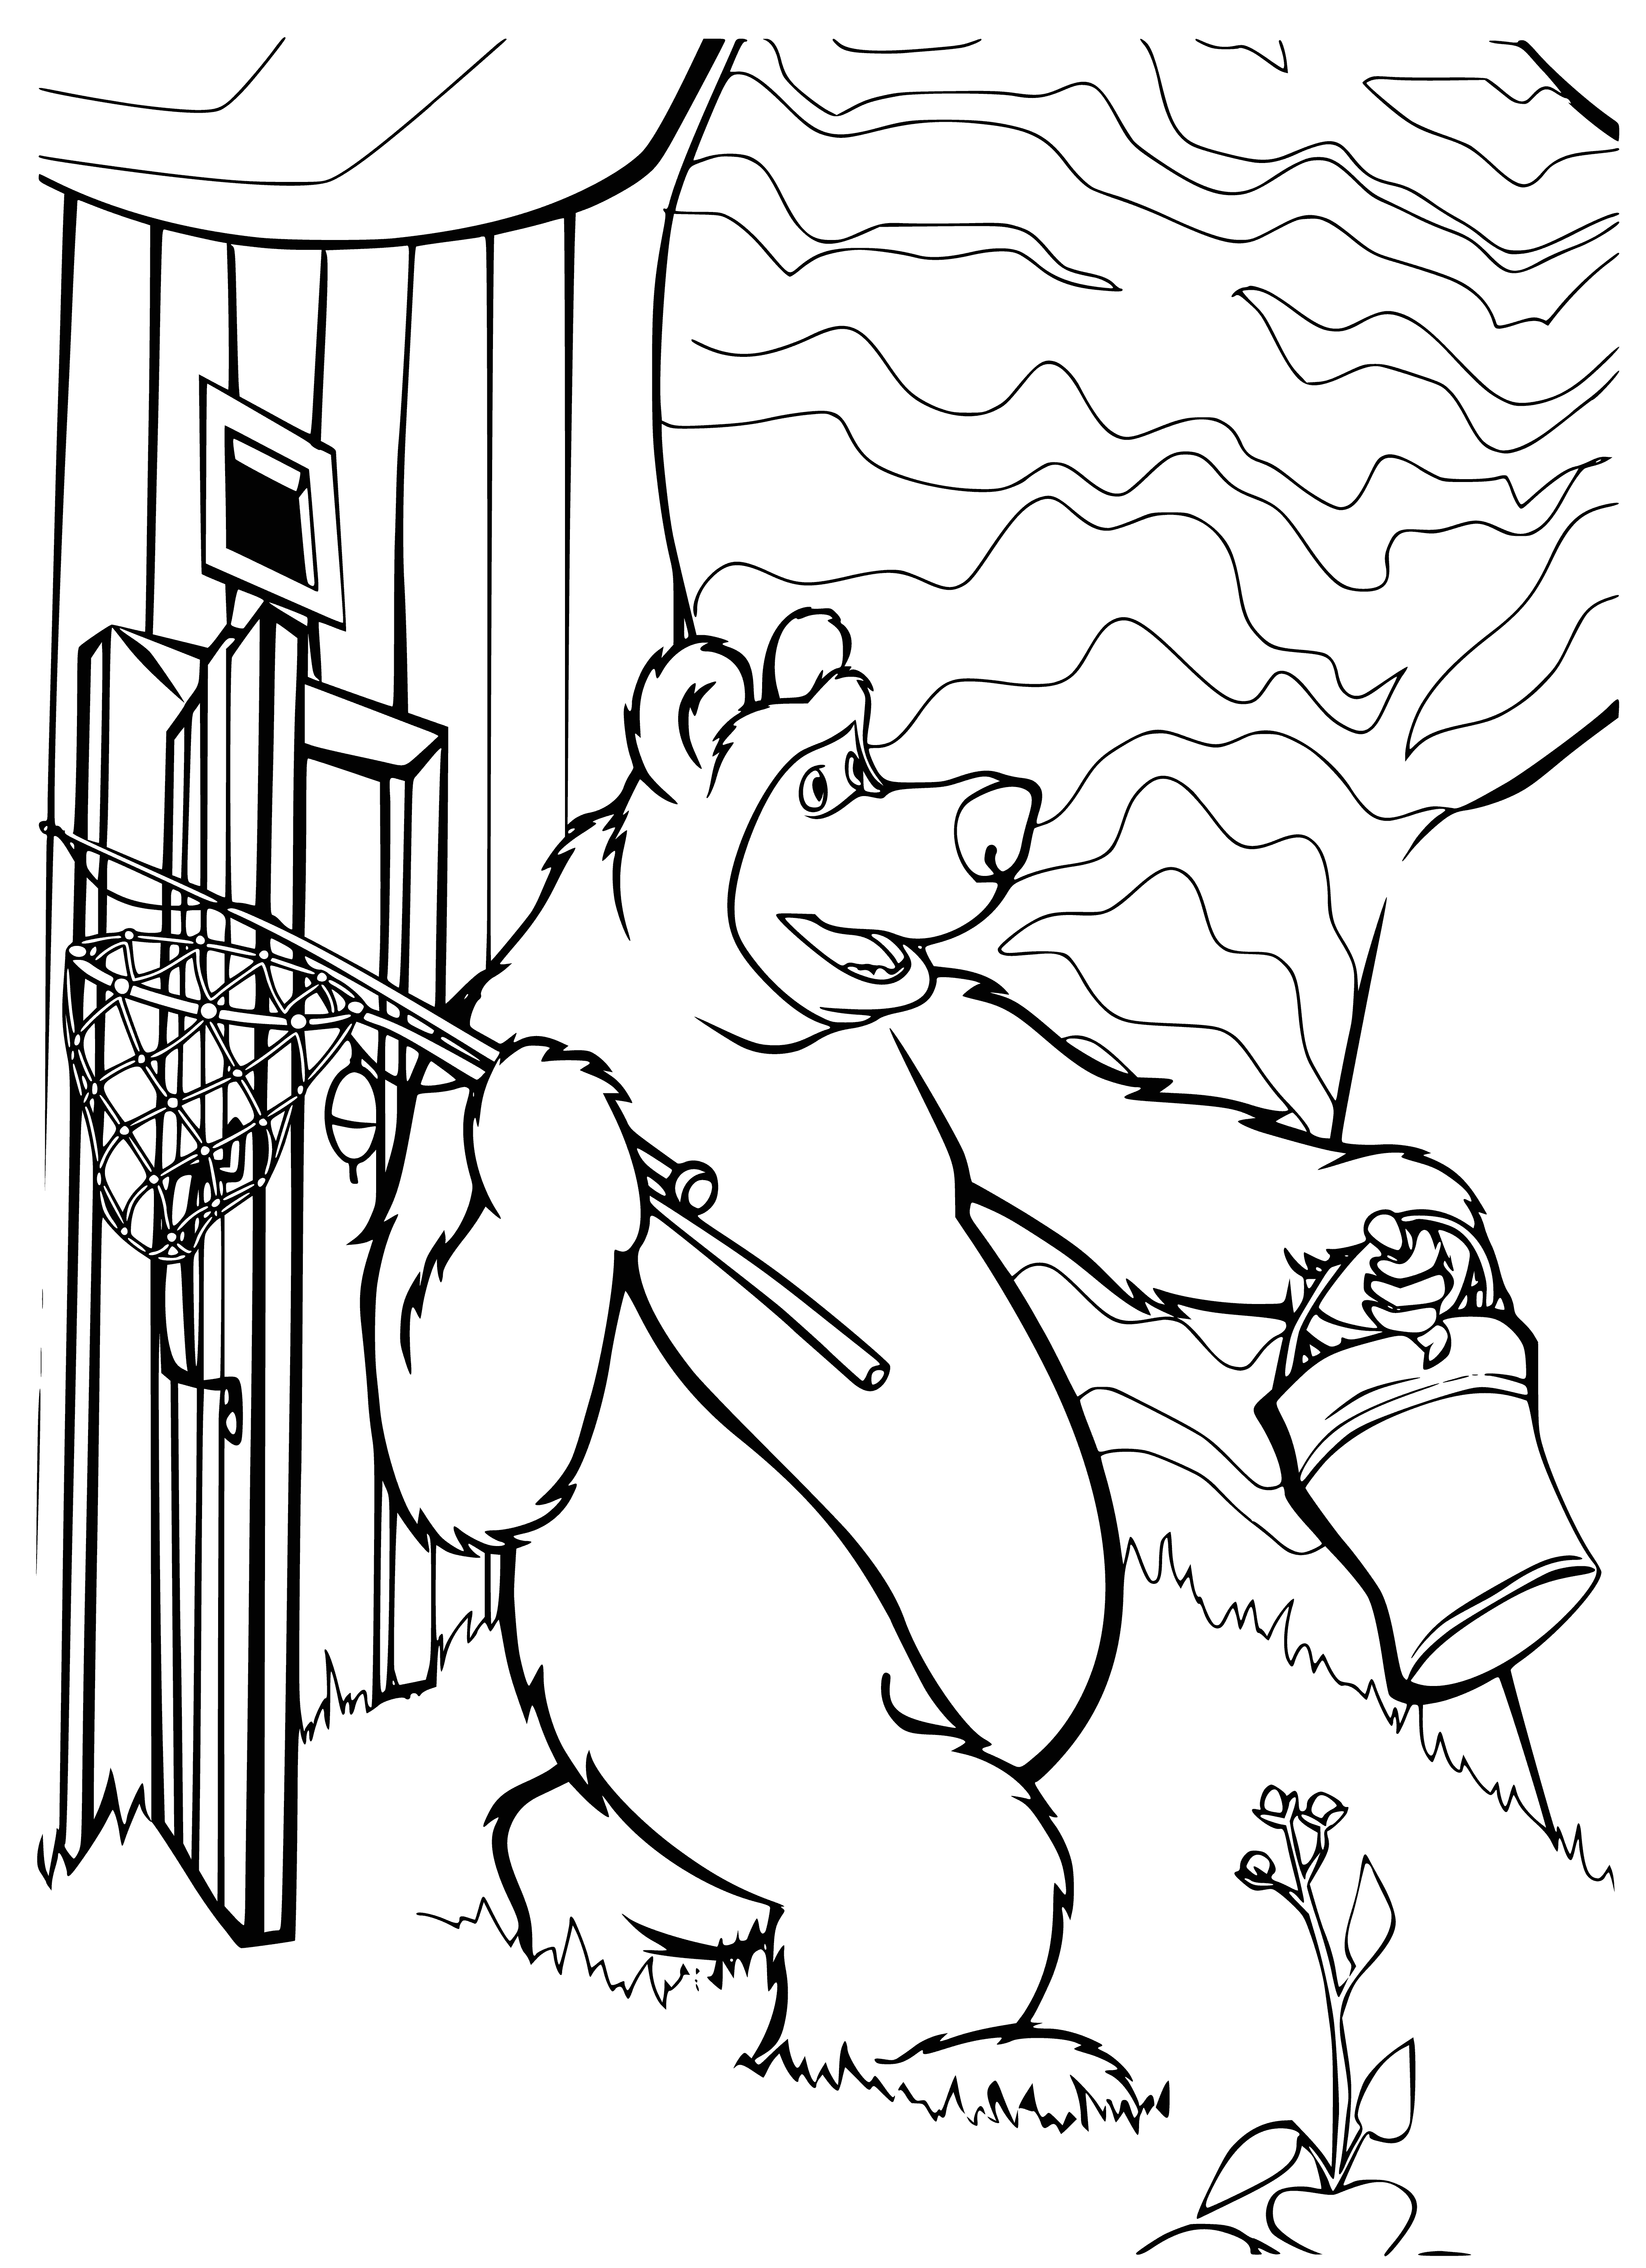 coloring page: Masha and Bear fishing in a forest with a river. A fish jumps out of the water.